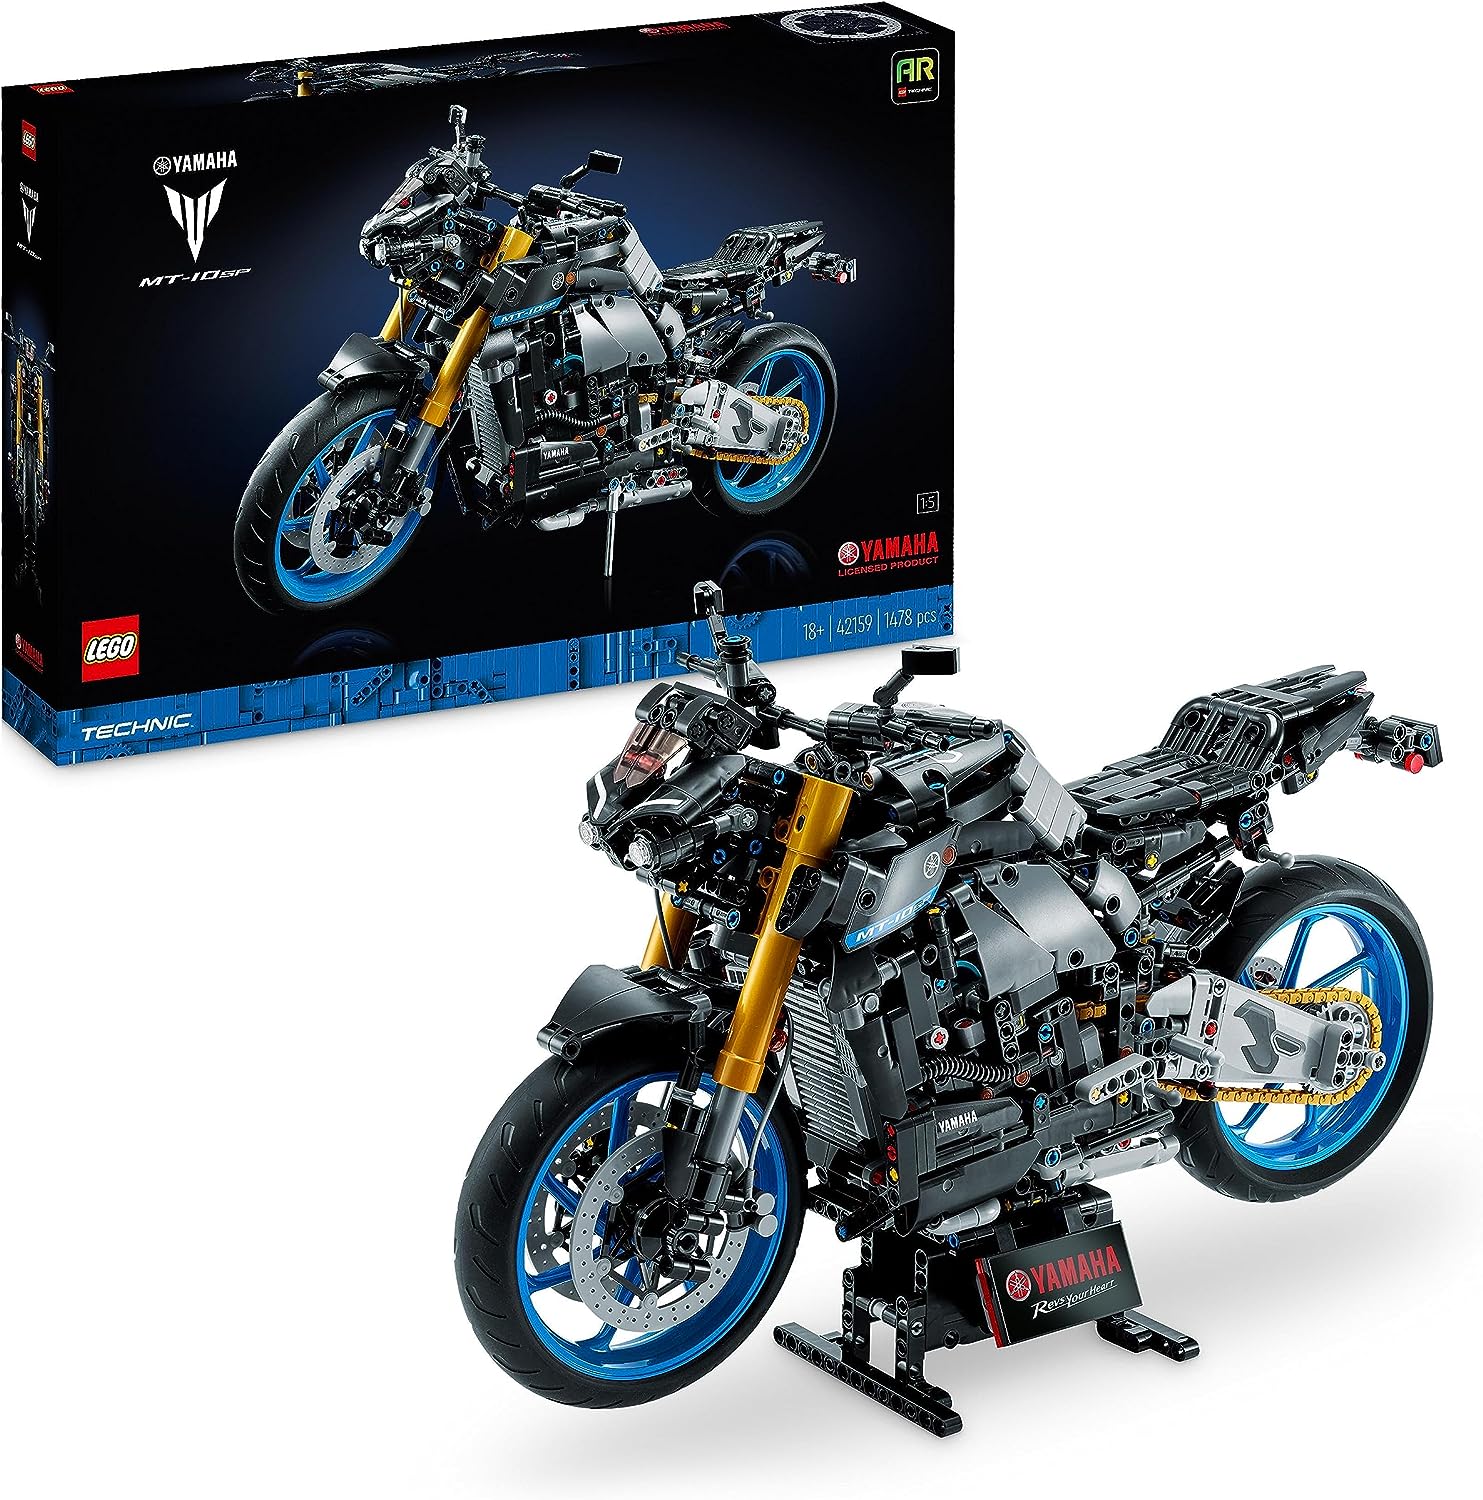 LEGO 42159 Technic Yamaha MT-10 SP Adult Motorcycle Model Kit, Authentic Vehicle Model with 4 Cylinder Engine, Functional Steering and AR App, Gift for Men and Women